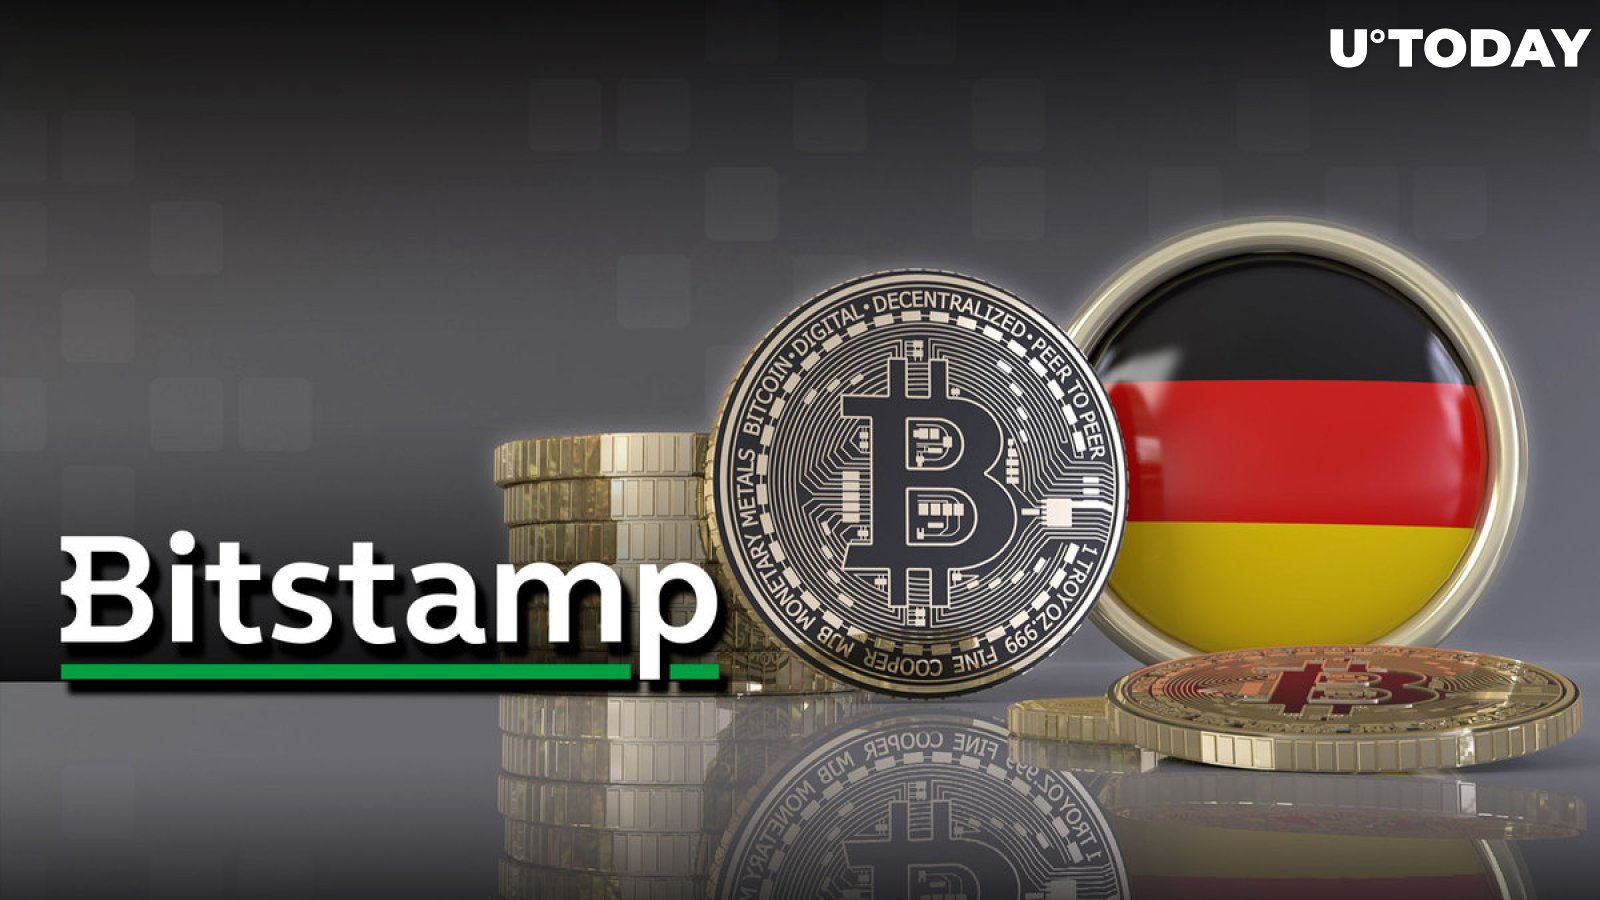 Germany's Bitcoin Sell-off Spree Grows, With 282.74 BTC to Bitstamp